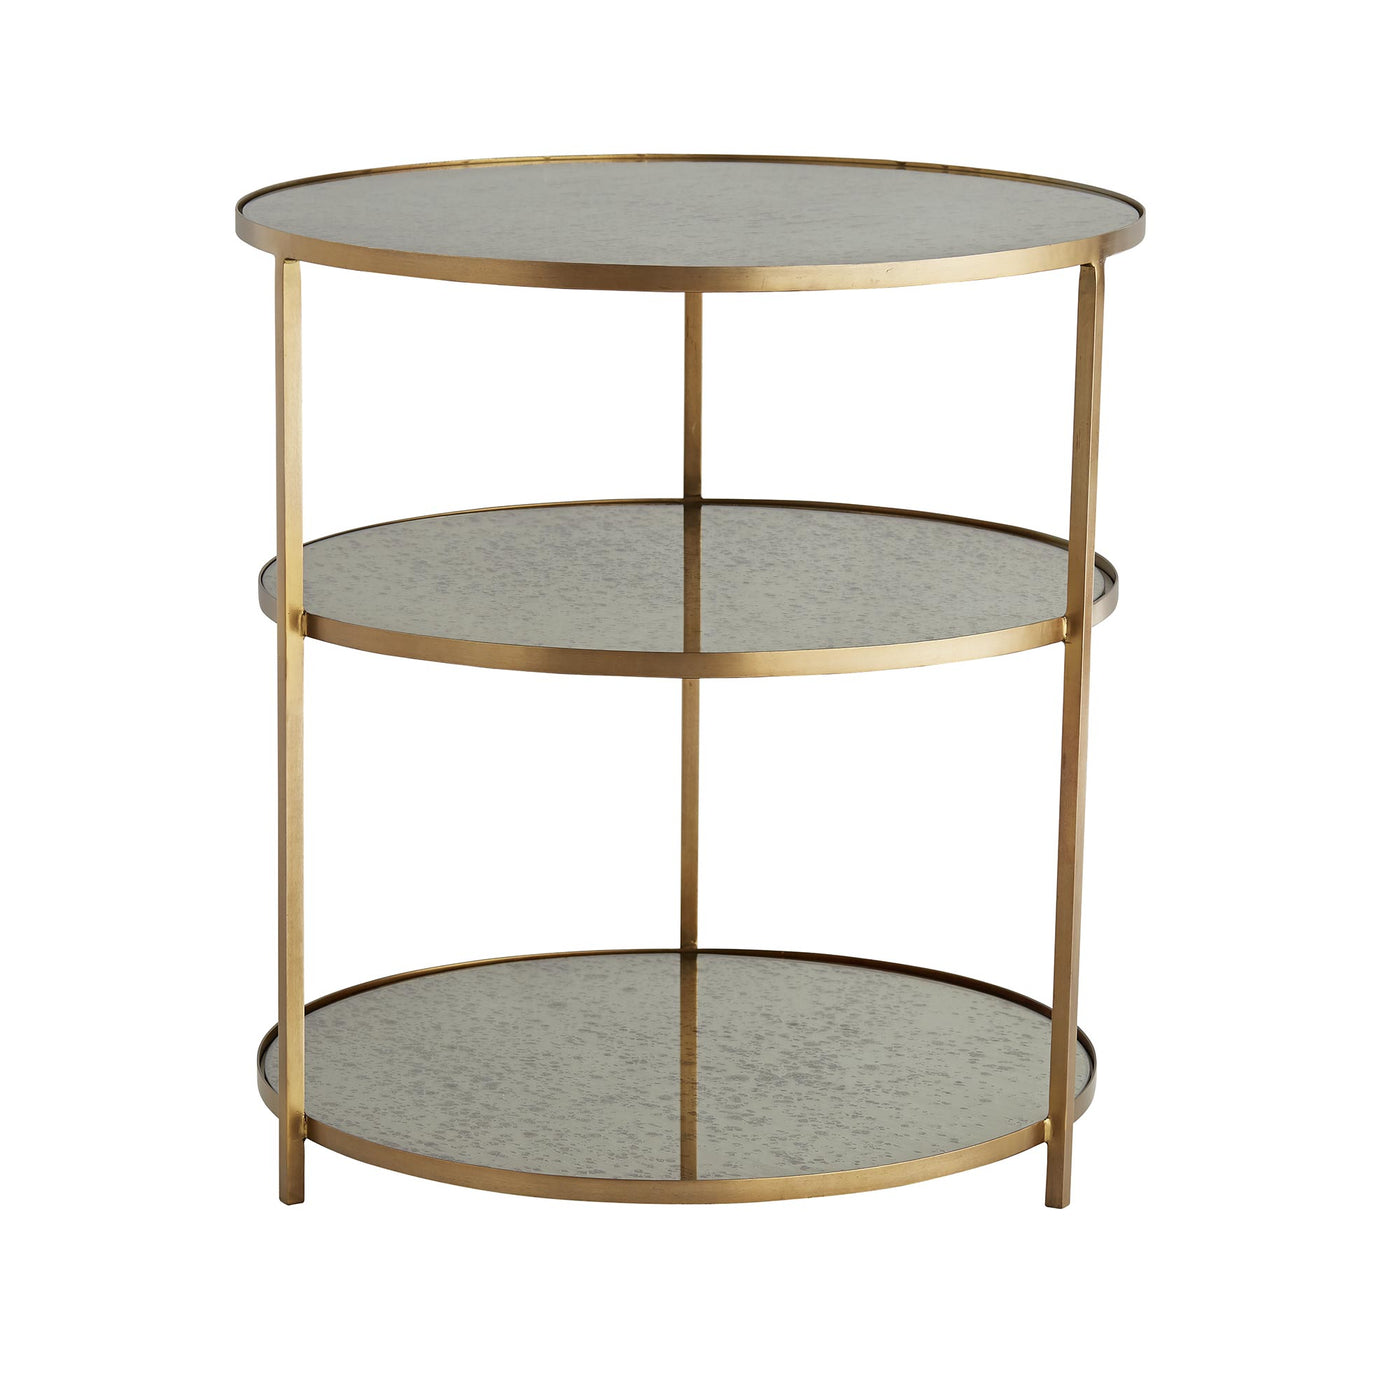 SIDE TABLE ROUND 3-TIER MIRRORED ANTIQUE BRASS